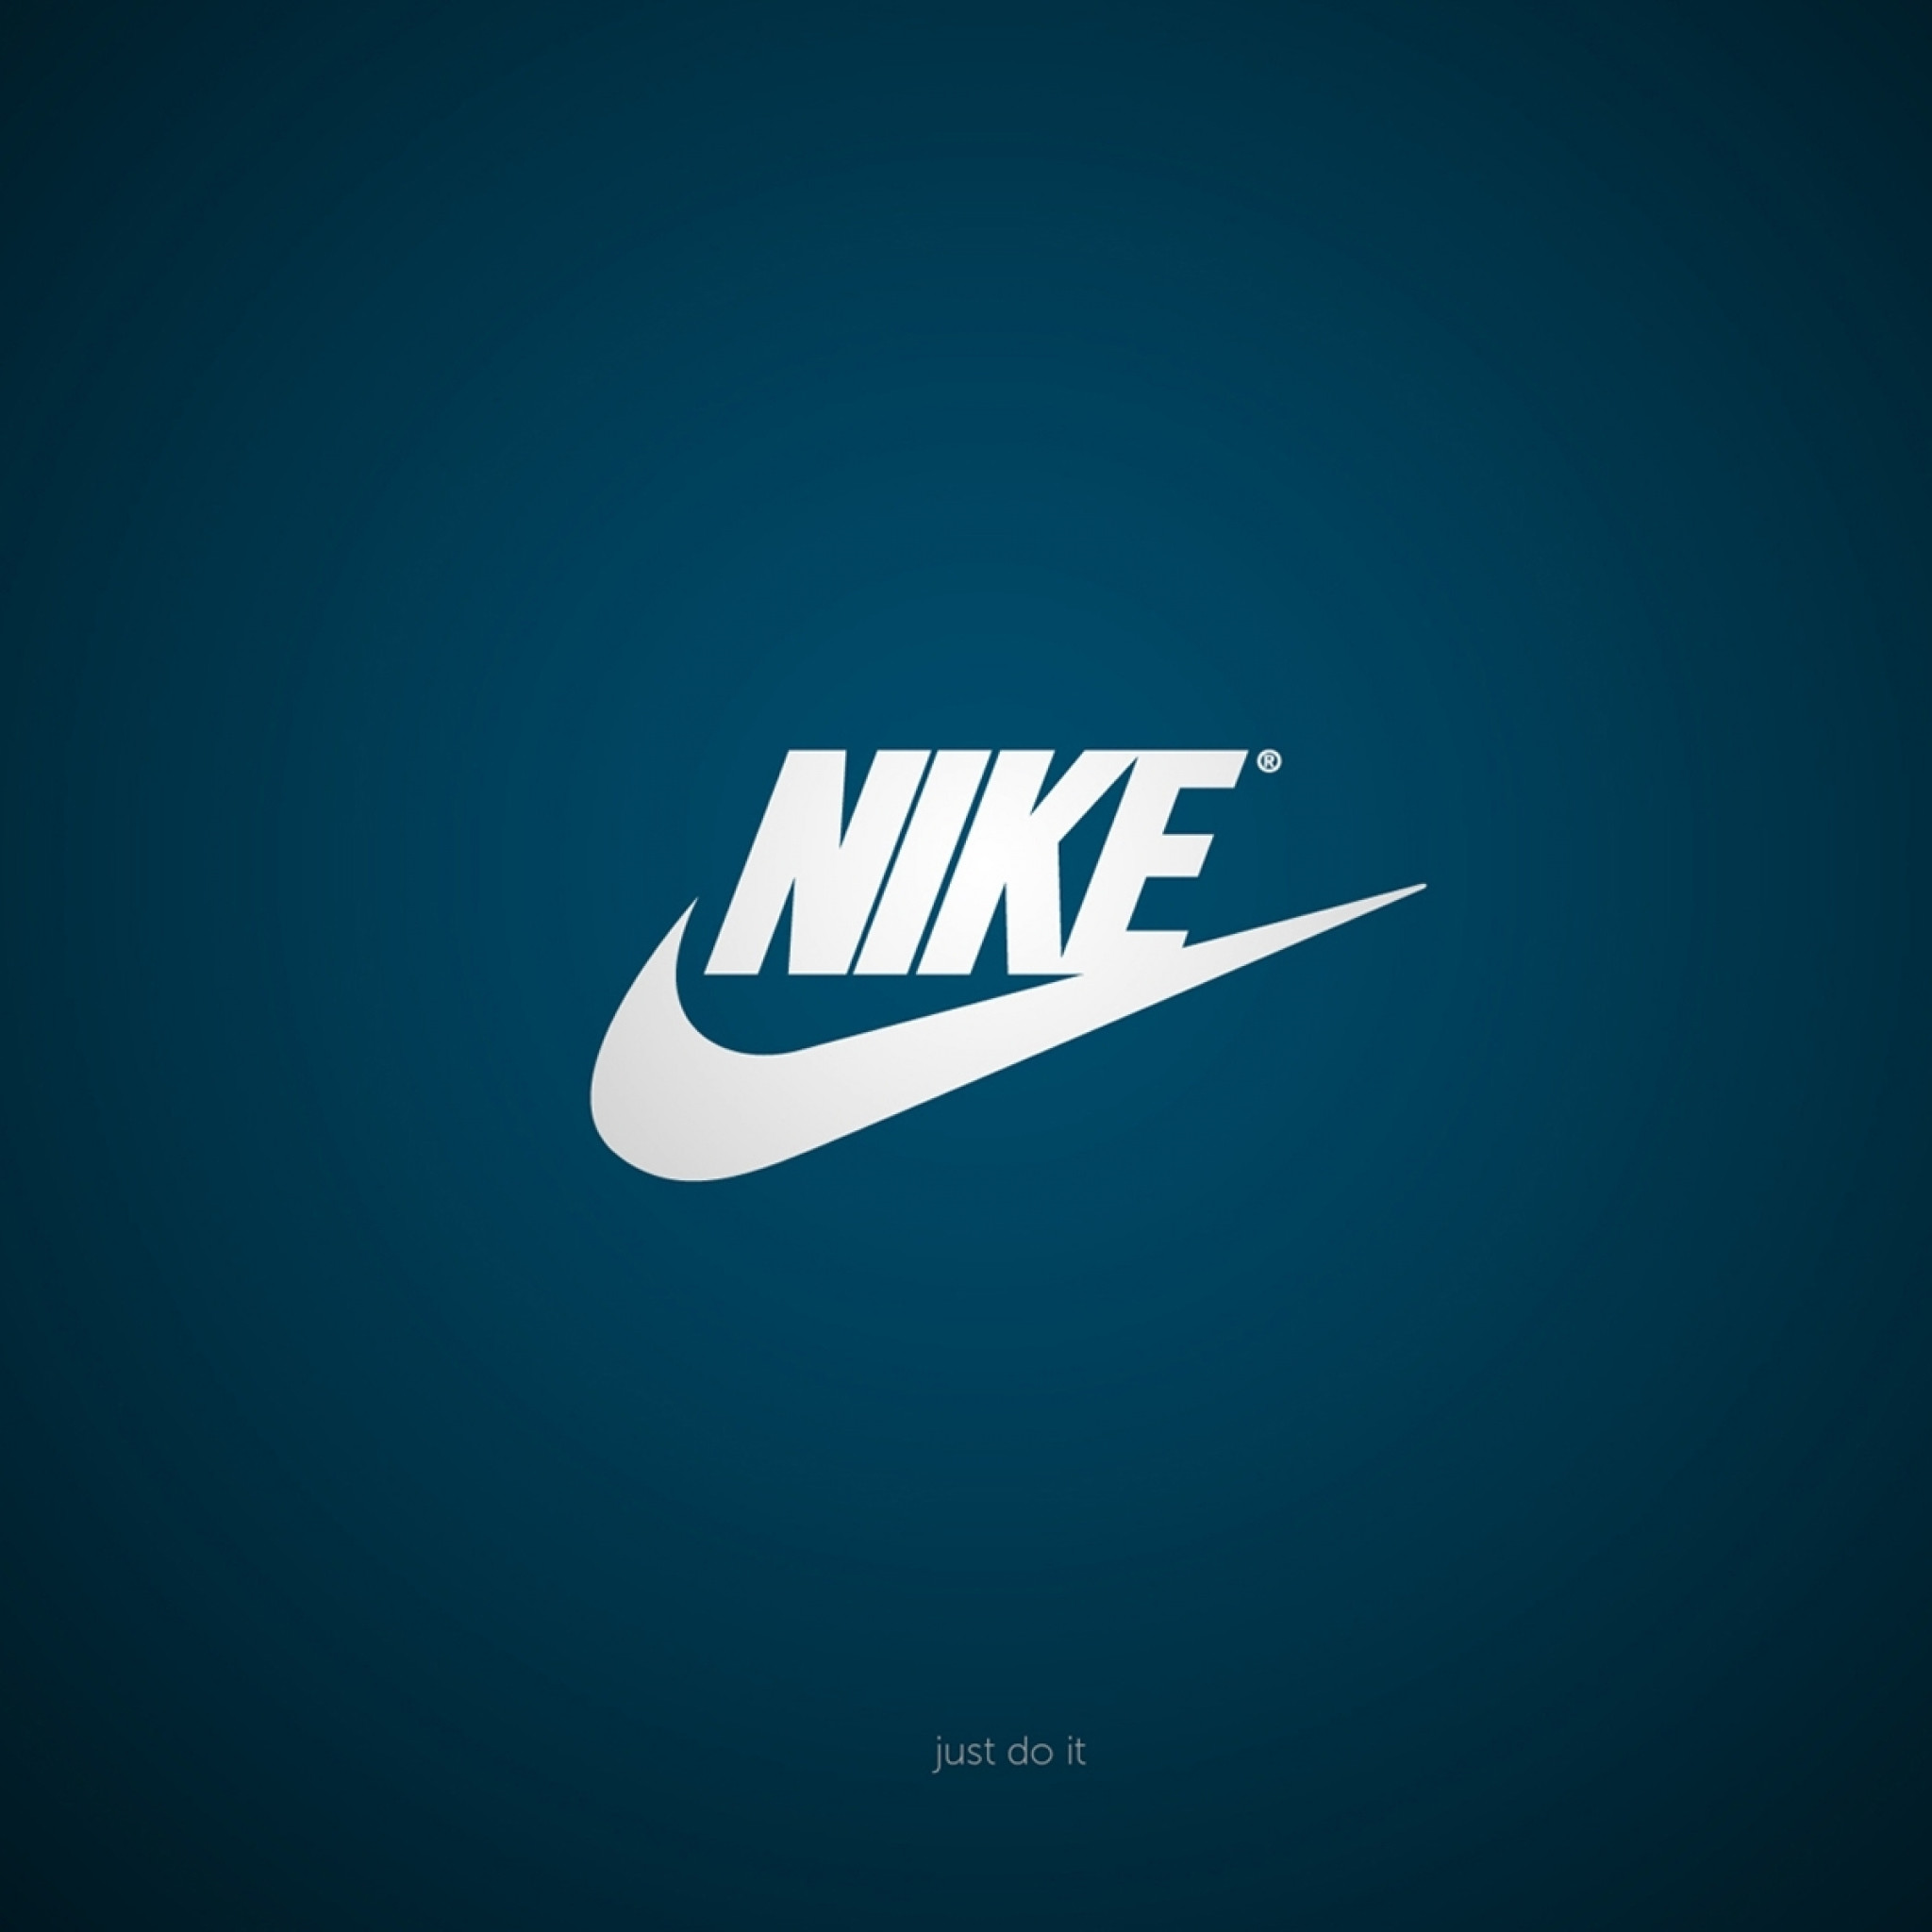 Nike Air Pictures  Download Free Images on Unsplash